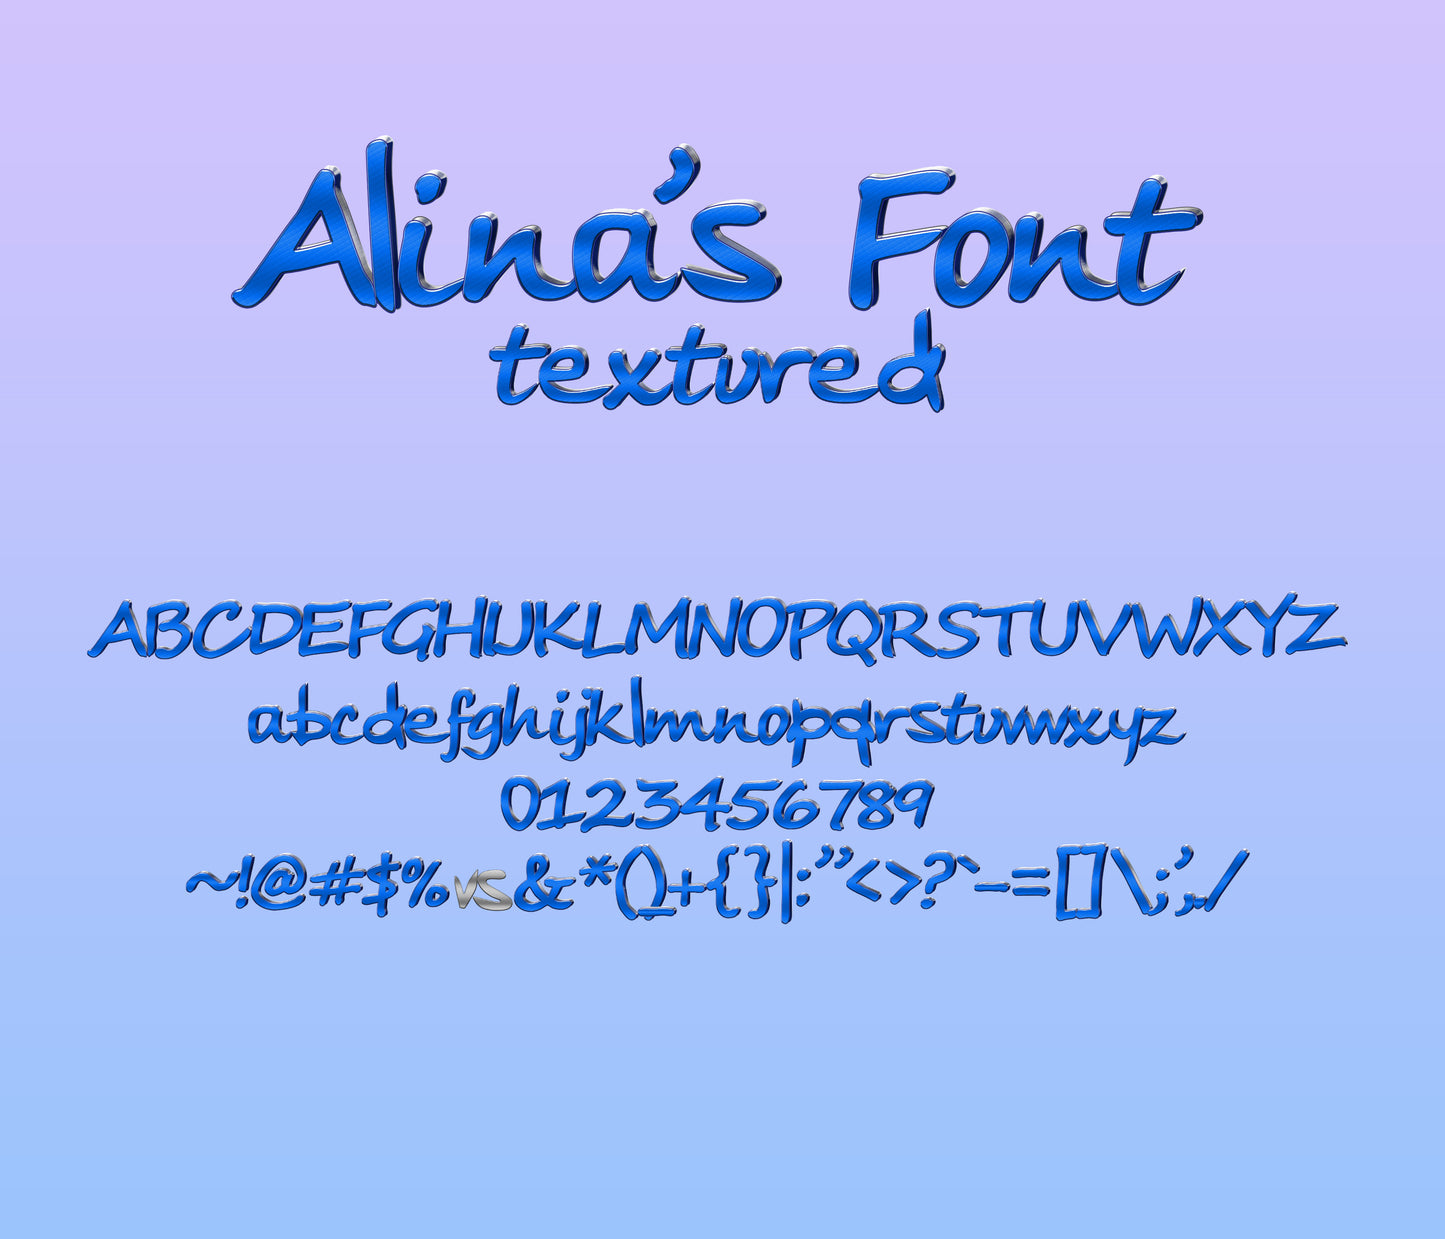 Red vs Blue Textured Font